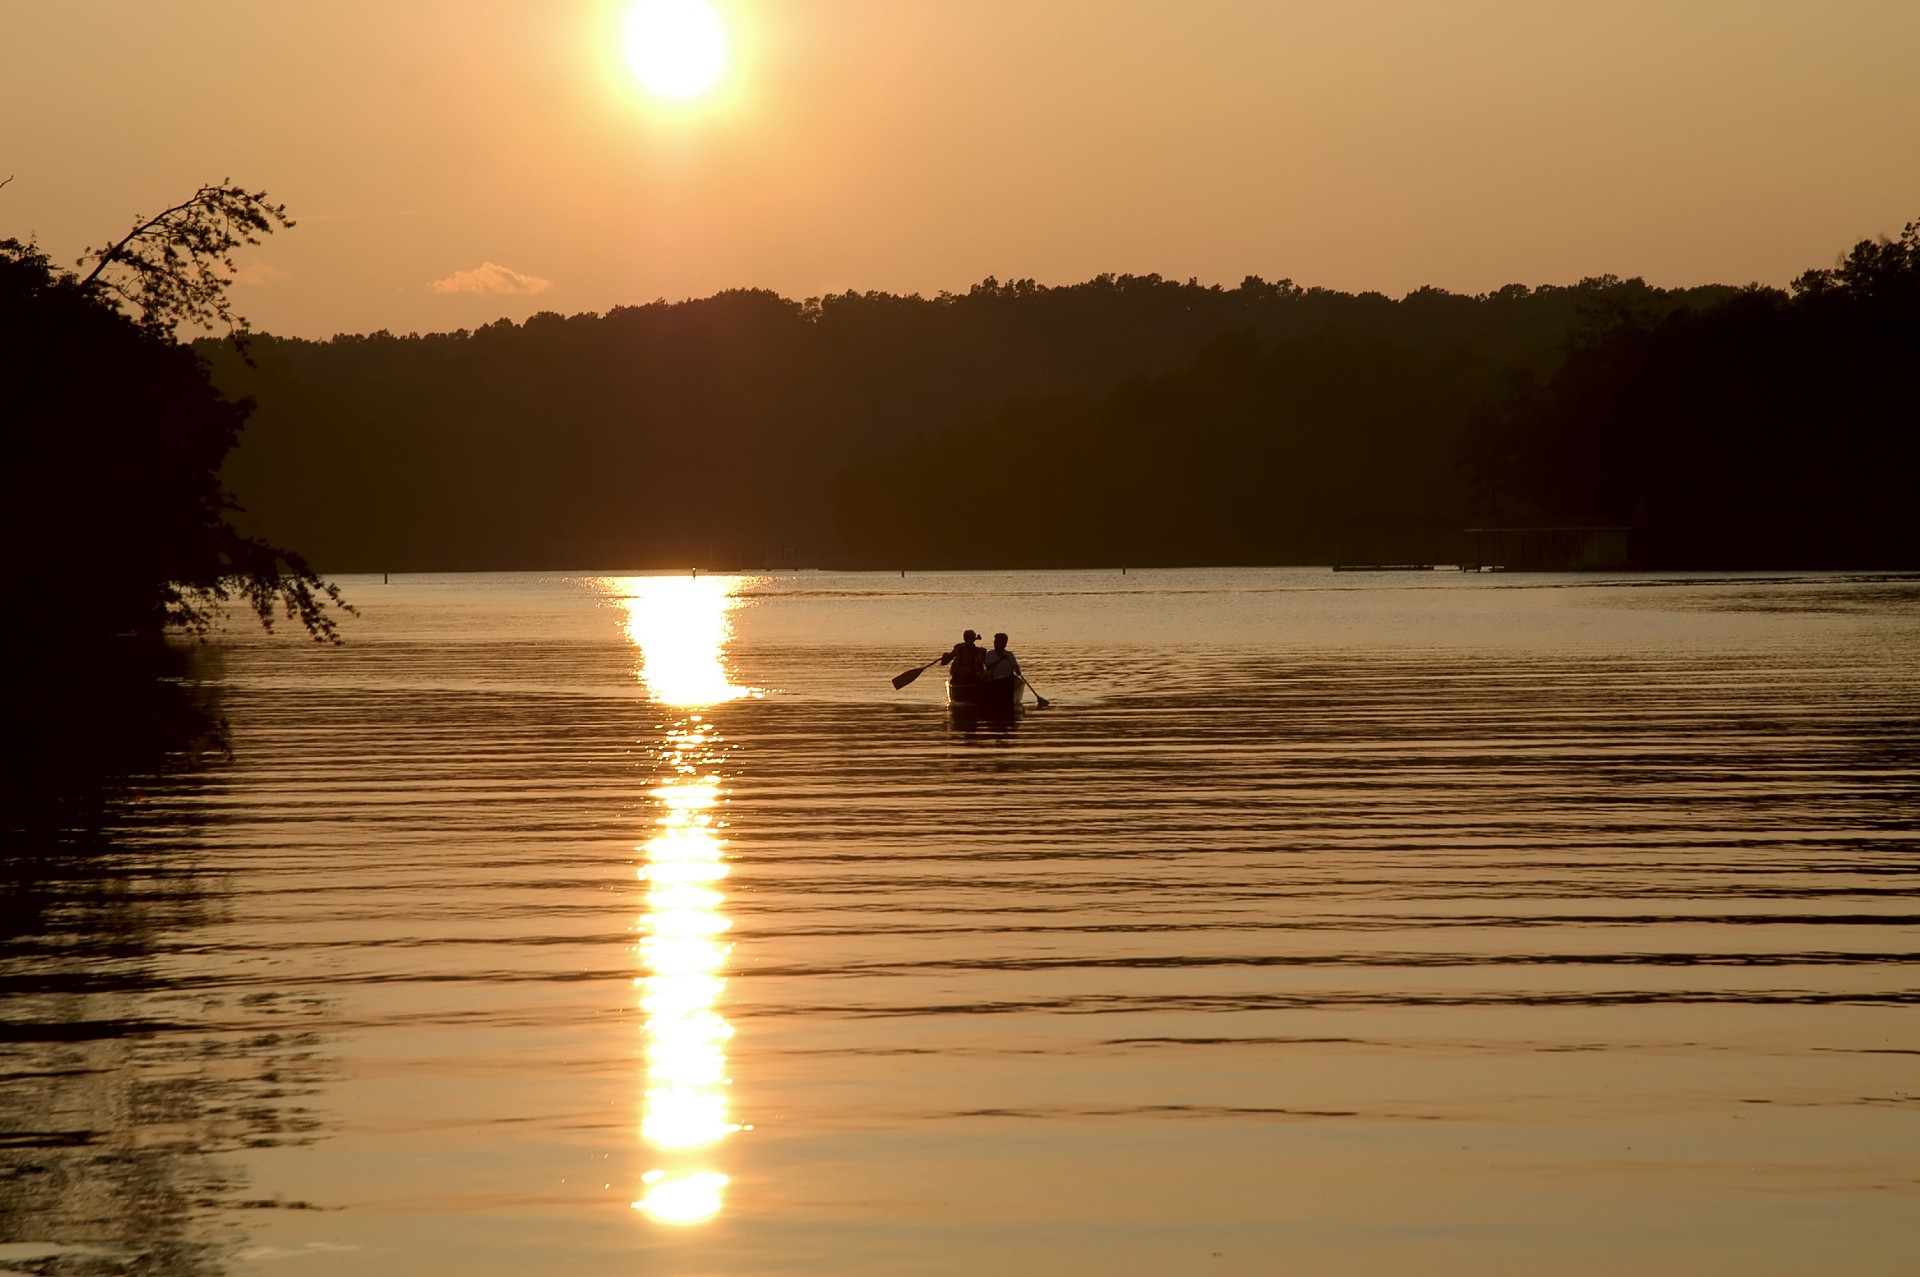 sunset view of people rowing their small boat on the lake